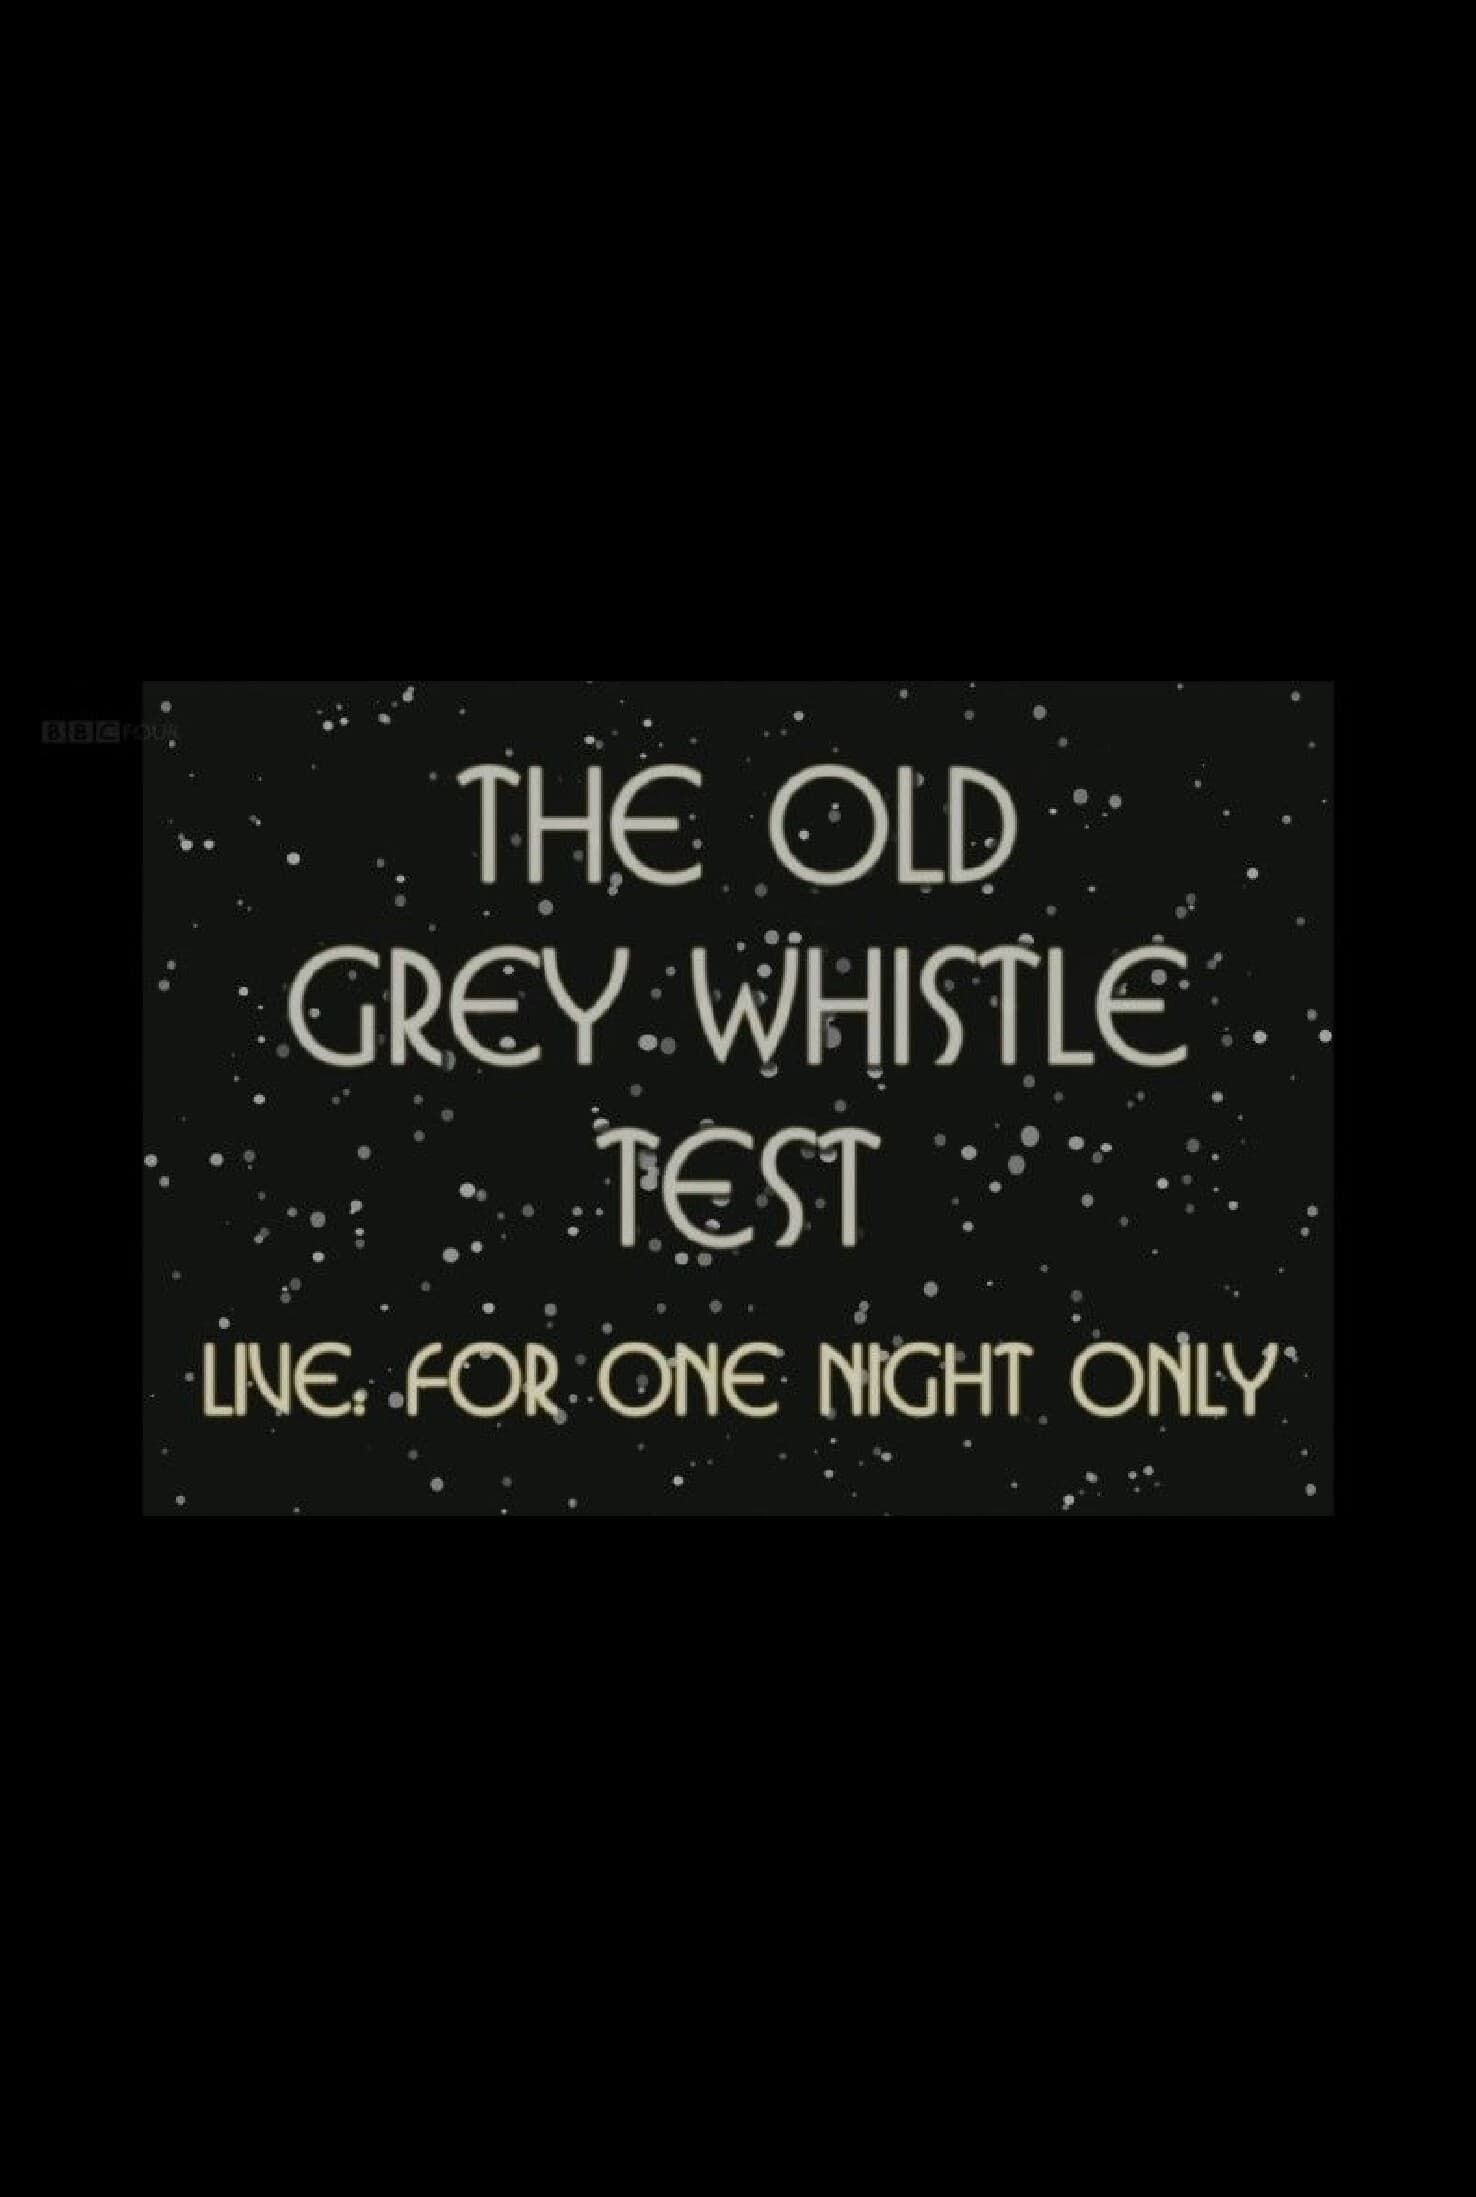 The Old Grey Whistle Test: Live for One Night Only